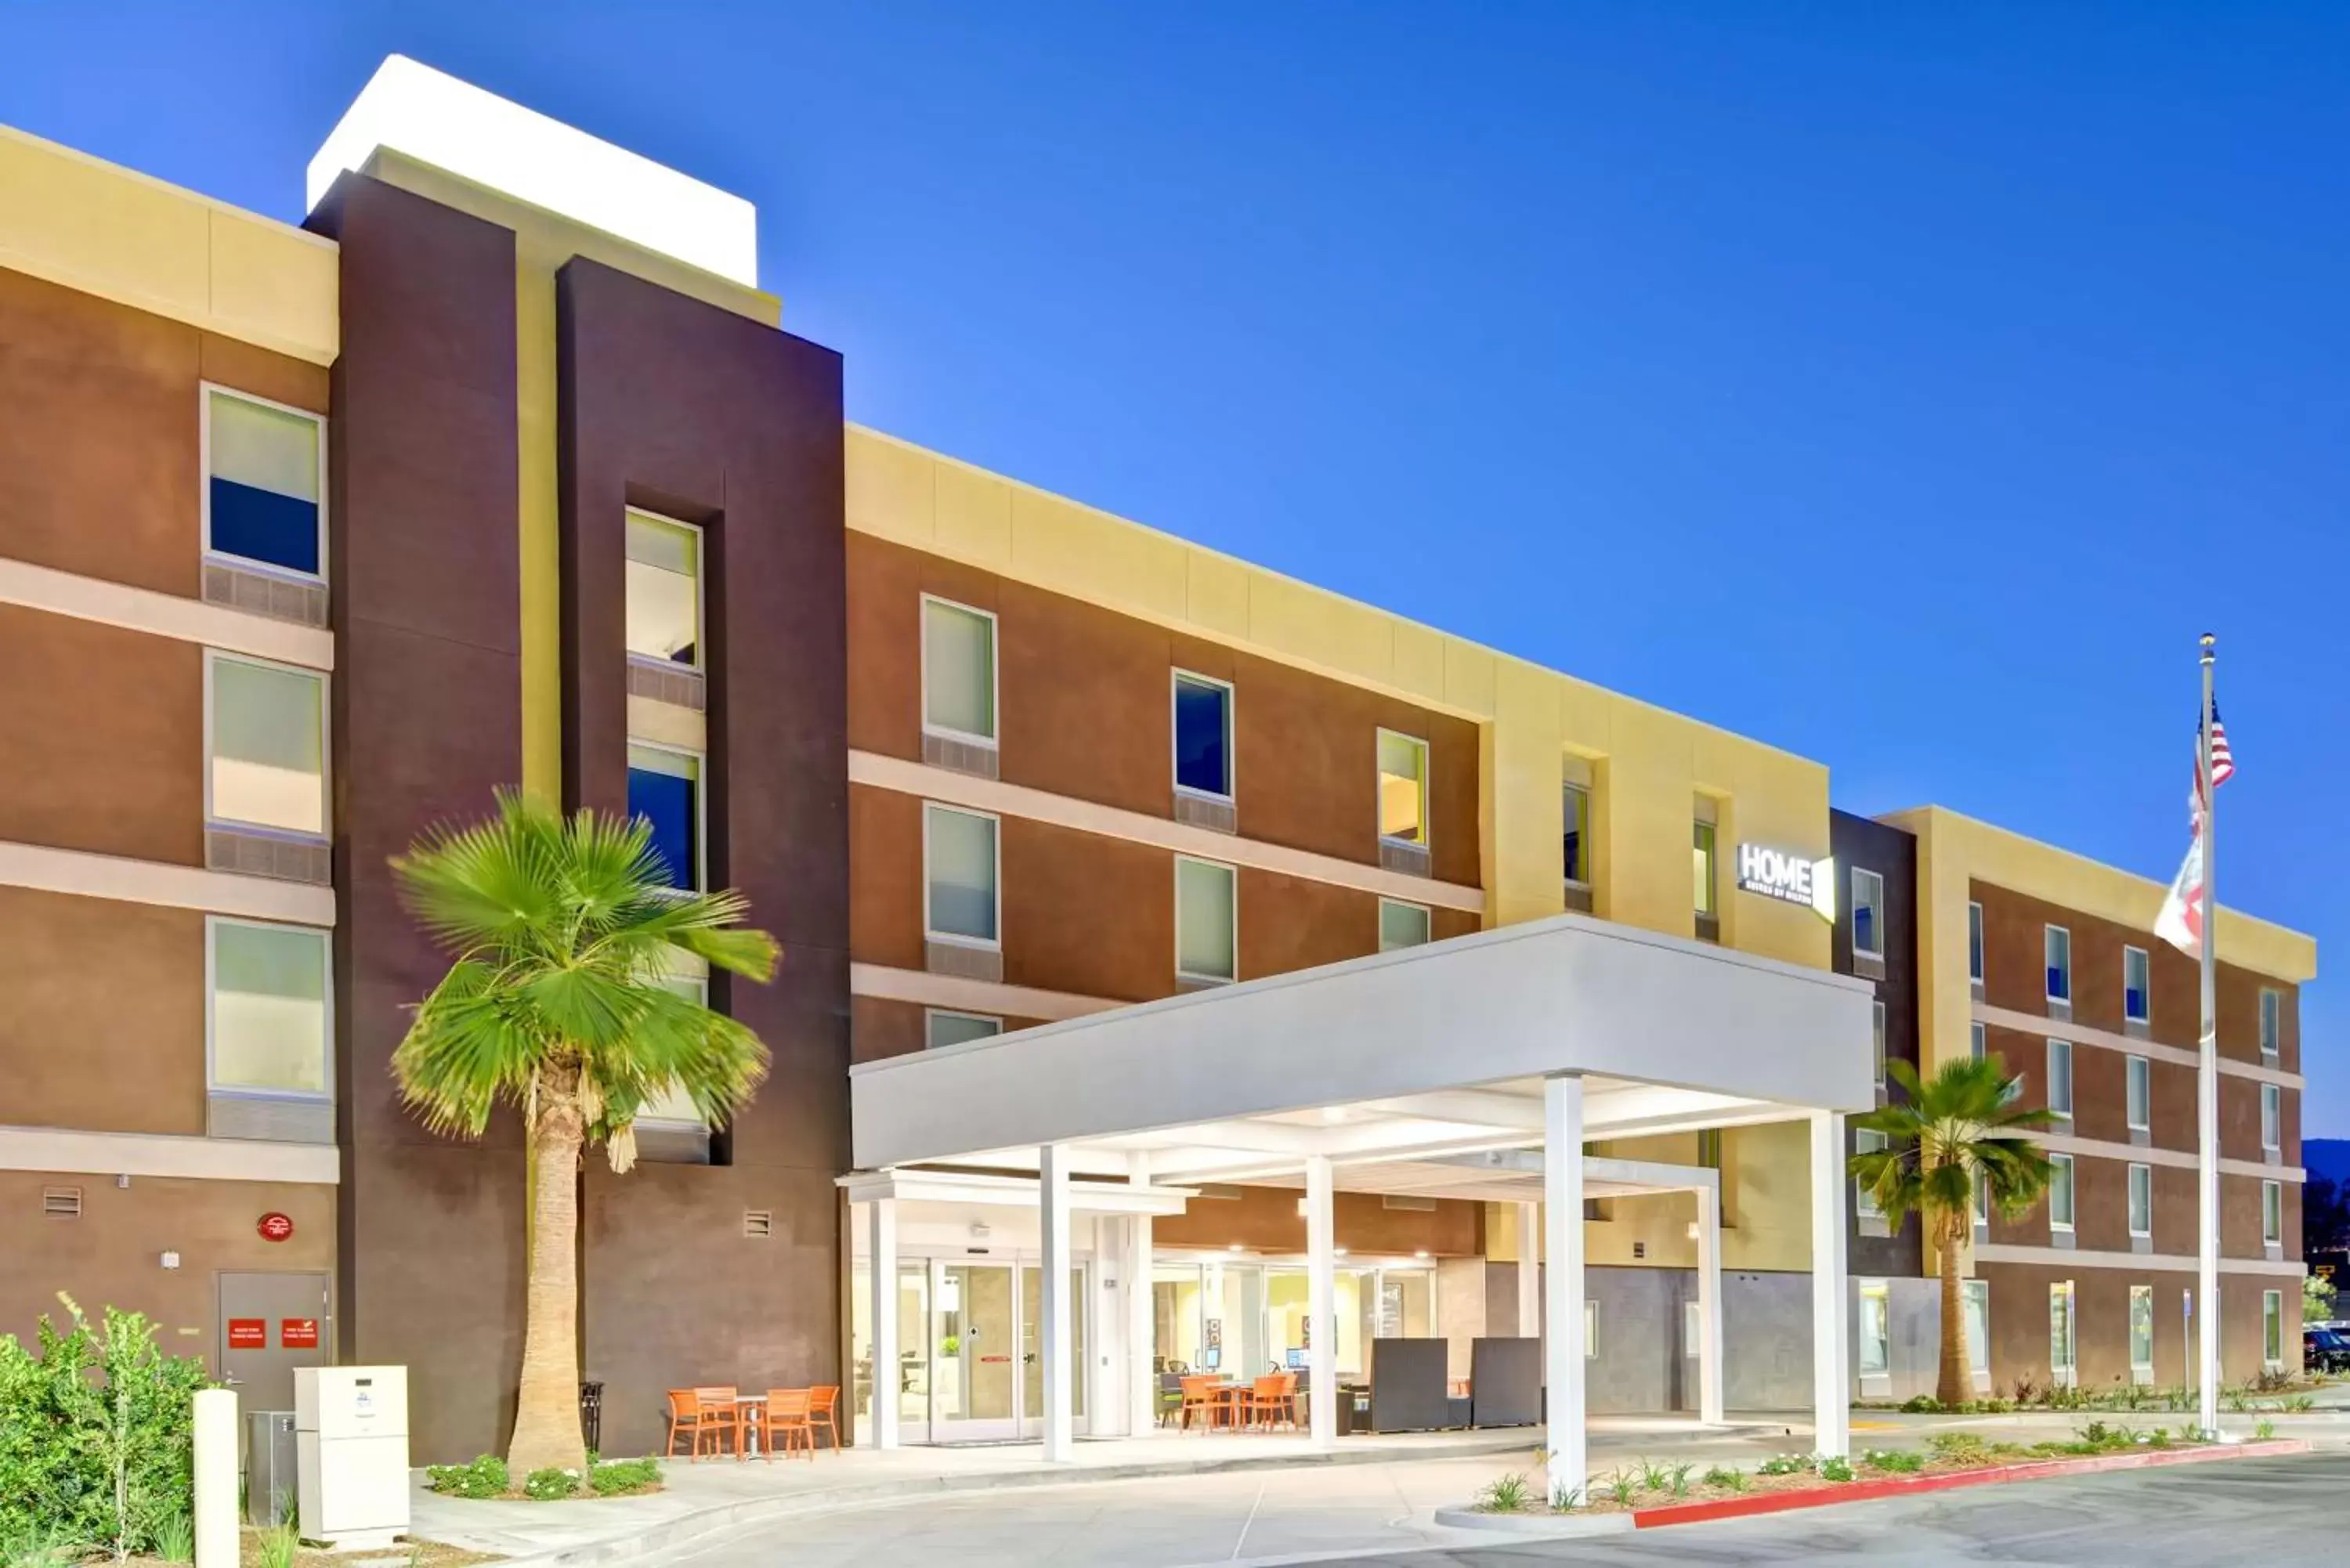 Property Building in Home2 Suites Azusa